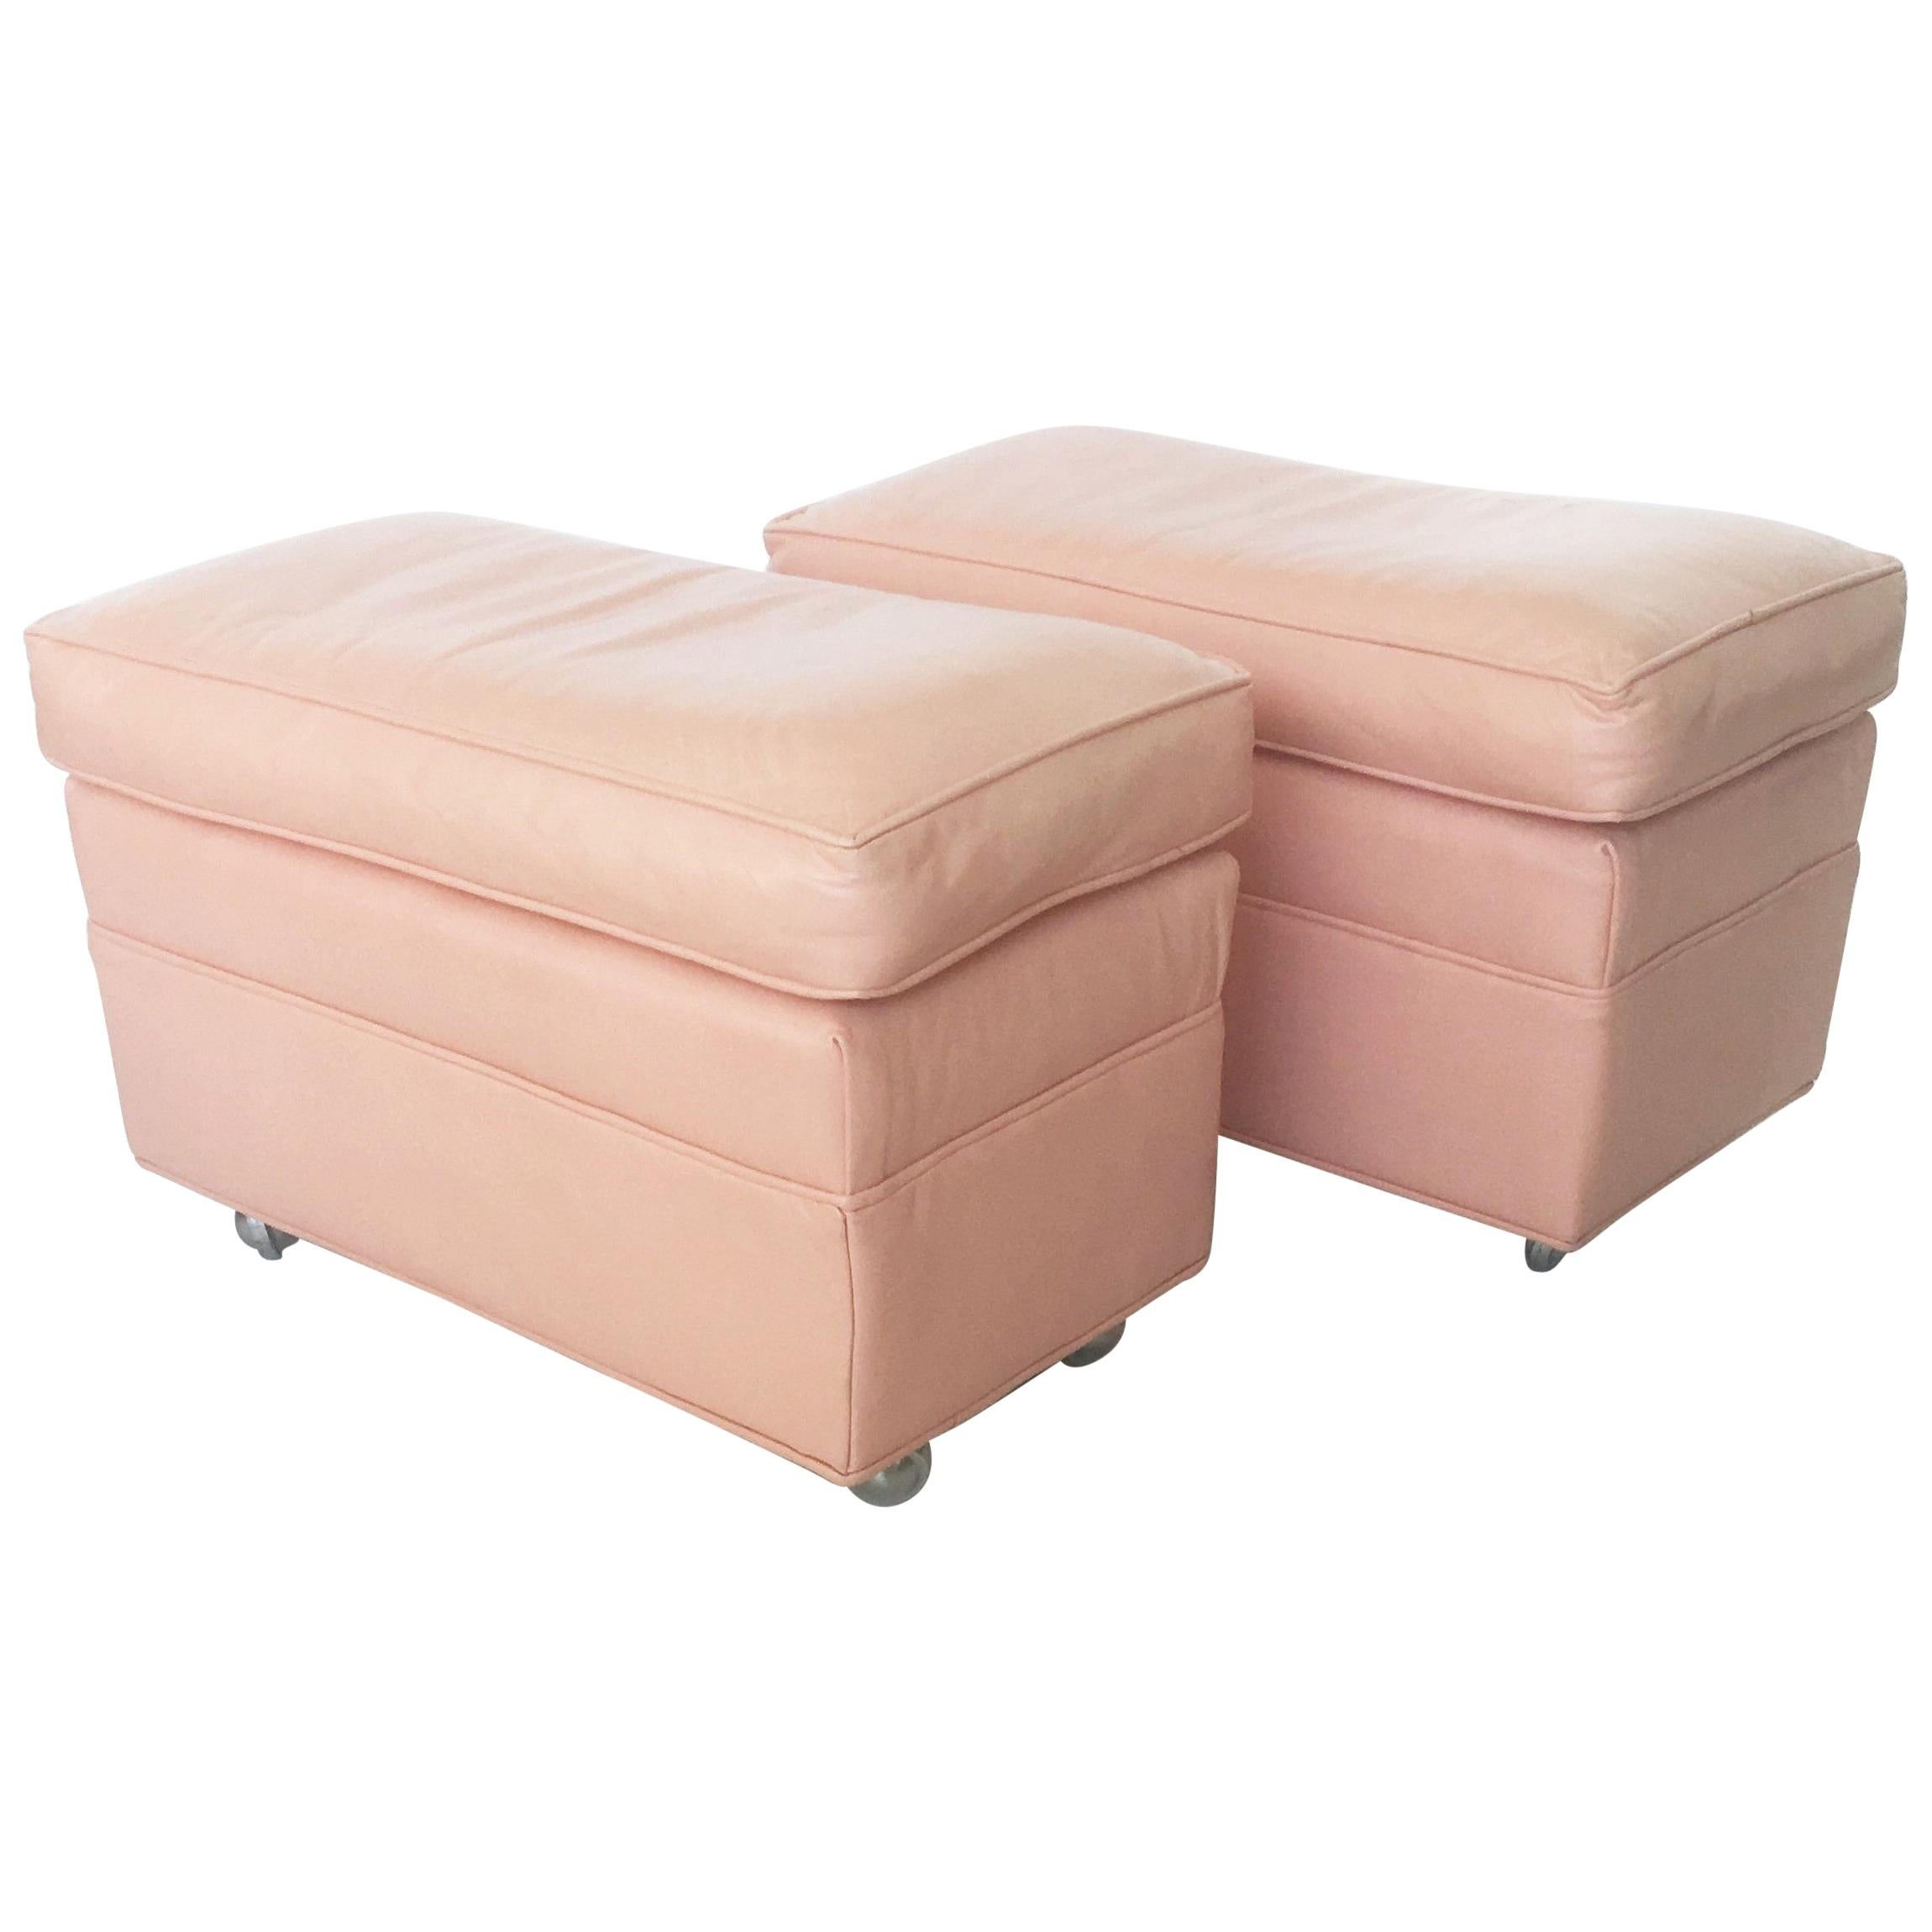 Pair of Mid-Century Modern Pink Ombre Leather Ottomans on Casters